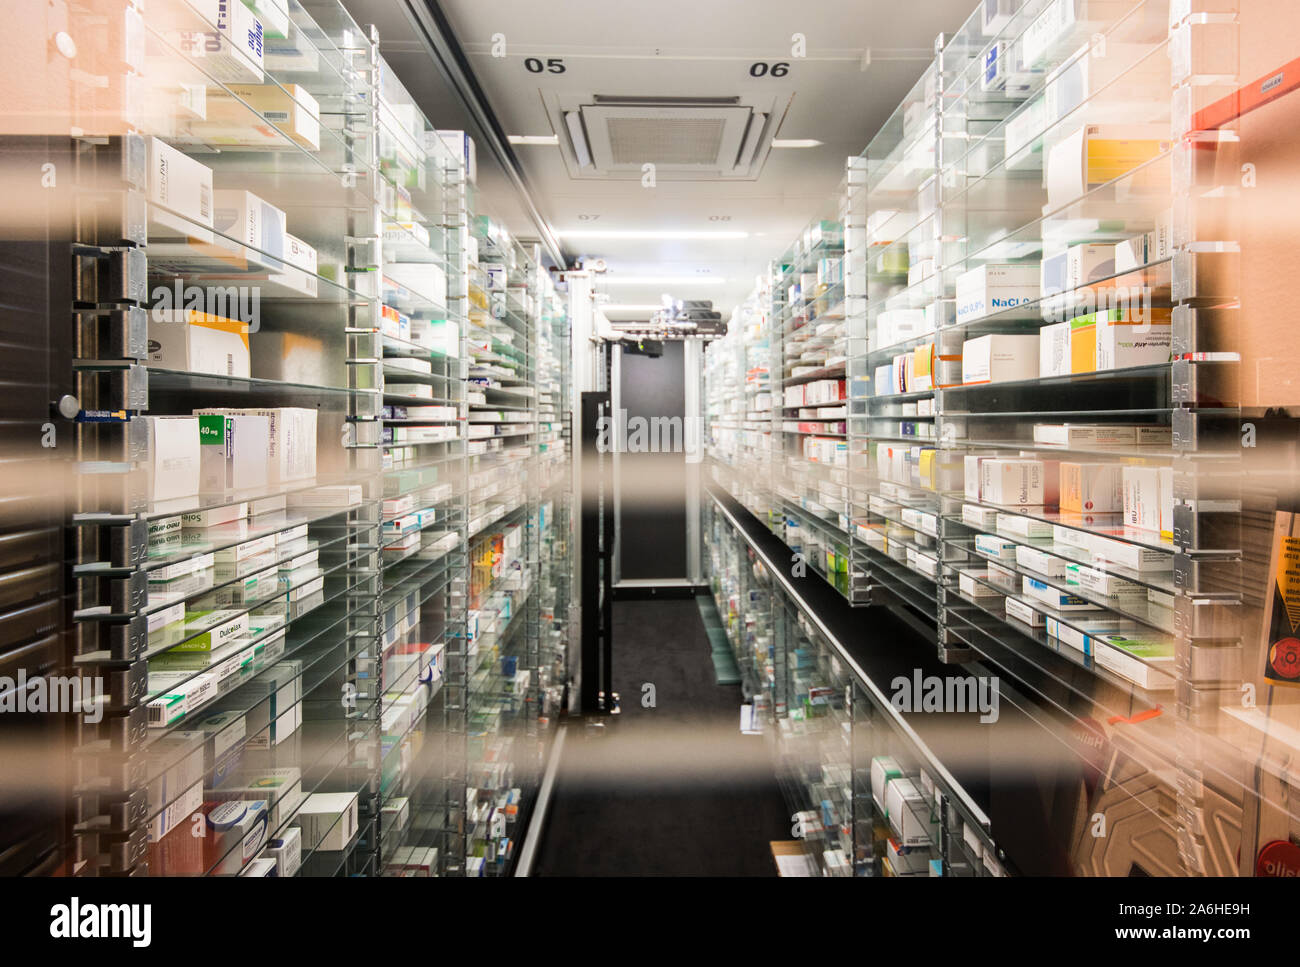 25 October 2019, Hessen, Frankfurt/Main: The Sertürner pharmacy offers a view through a glass pane into the fully automatic medicine store. Supply bottlenecks complicate the rapid supply of medication to patients. (to dpa: "Supply bottlenecks of medicines") Photo: Andreas Arnold/dpa Stock Photo